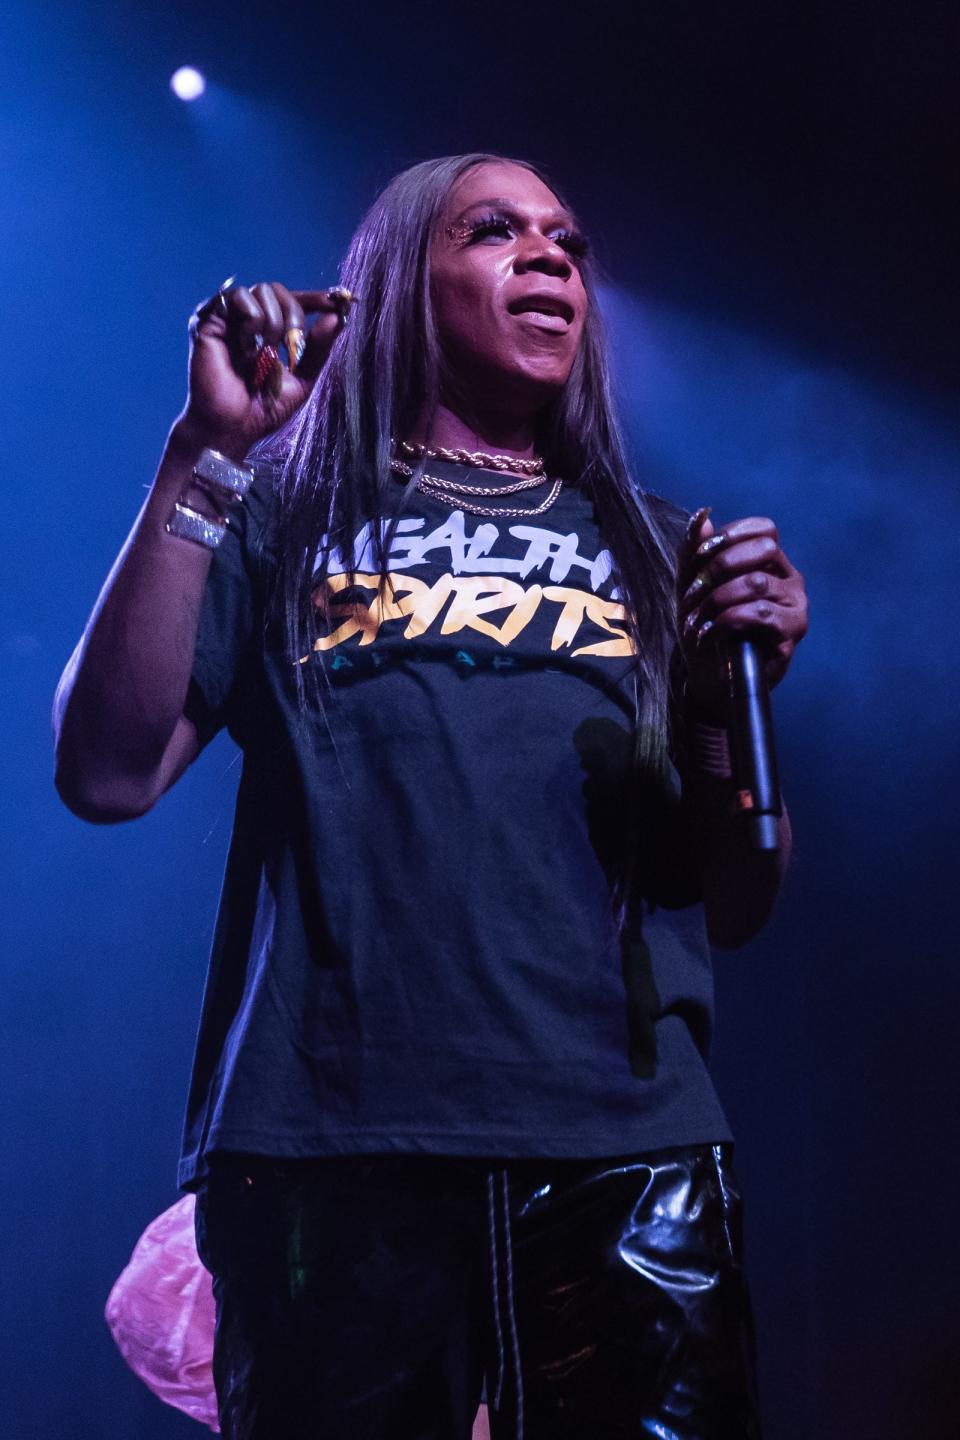 Big Freedia will perform with Trombone Shorty at the Capital City Amphitheater on Oct. 13, 2022.